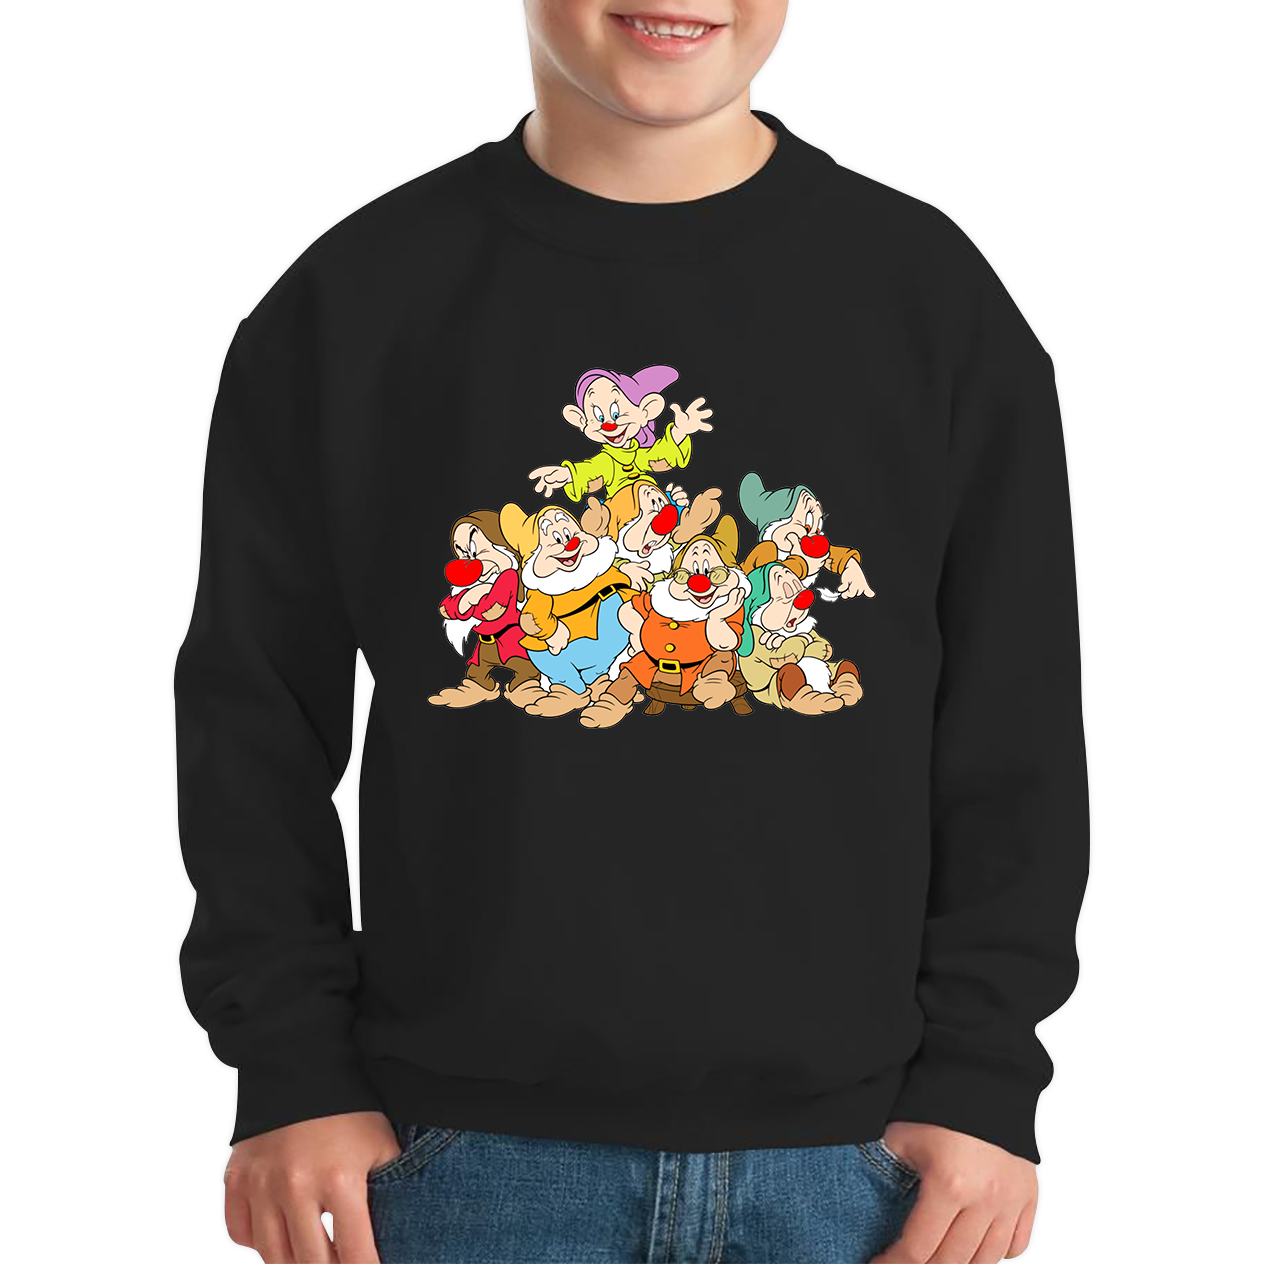 Disney Snow White and Seven Dwarfs Red Nose Day Kids Sweatshirt. 50% Goes To Charity